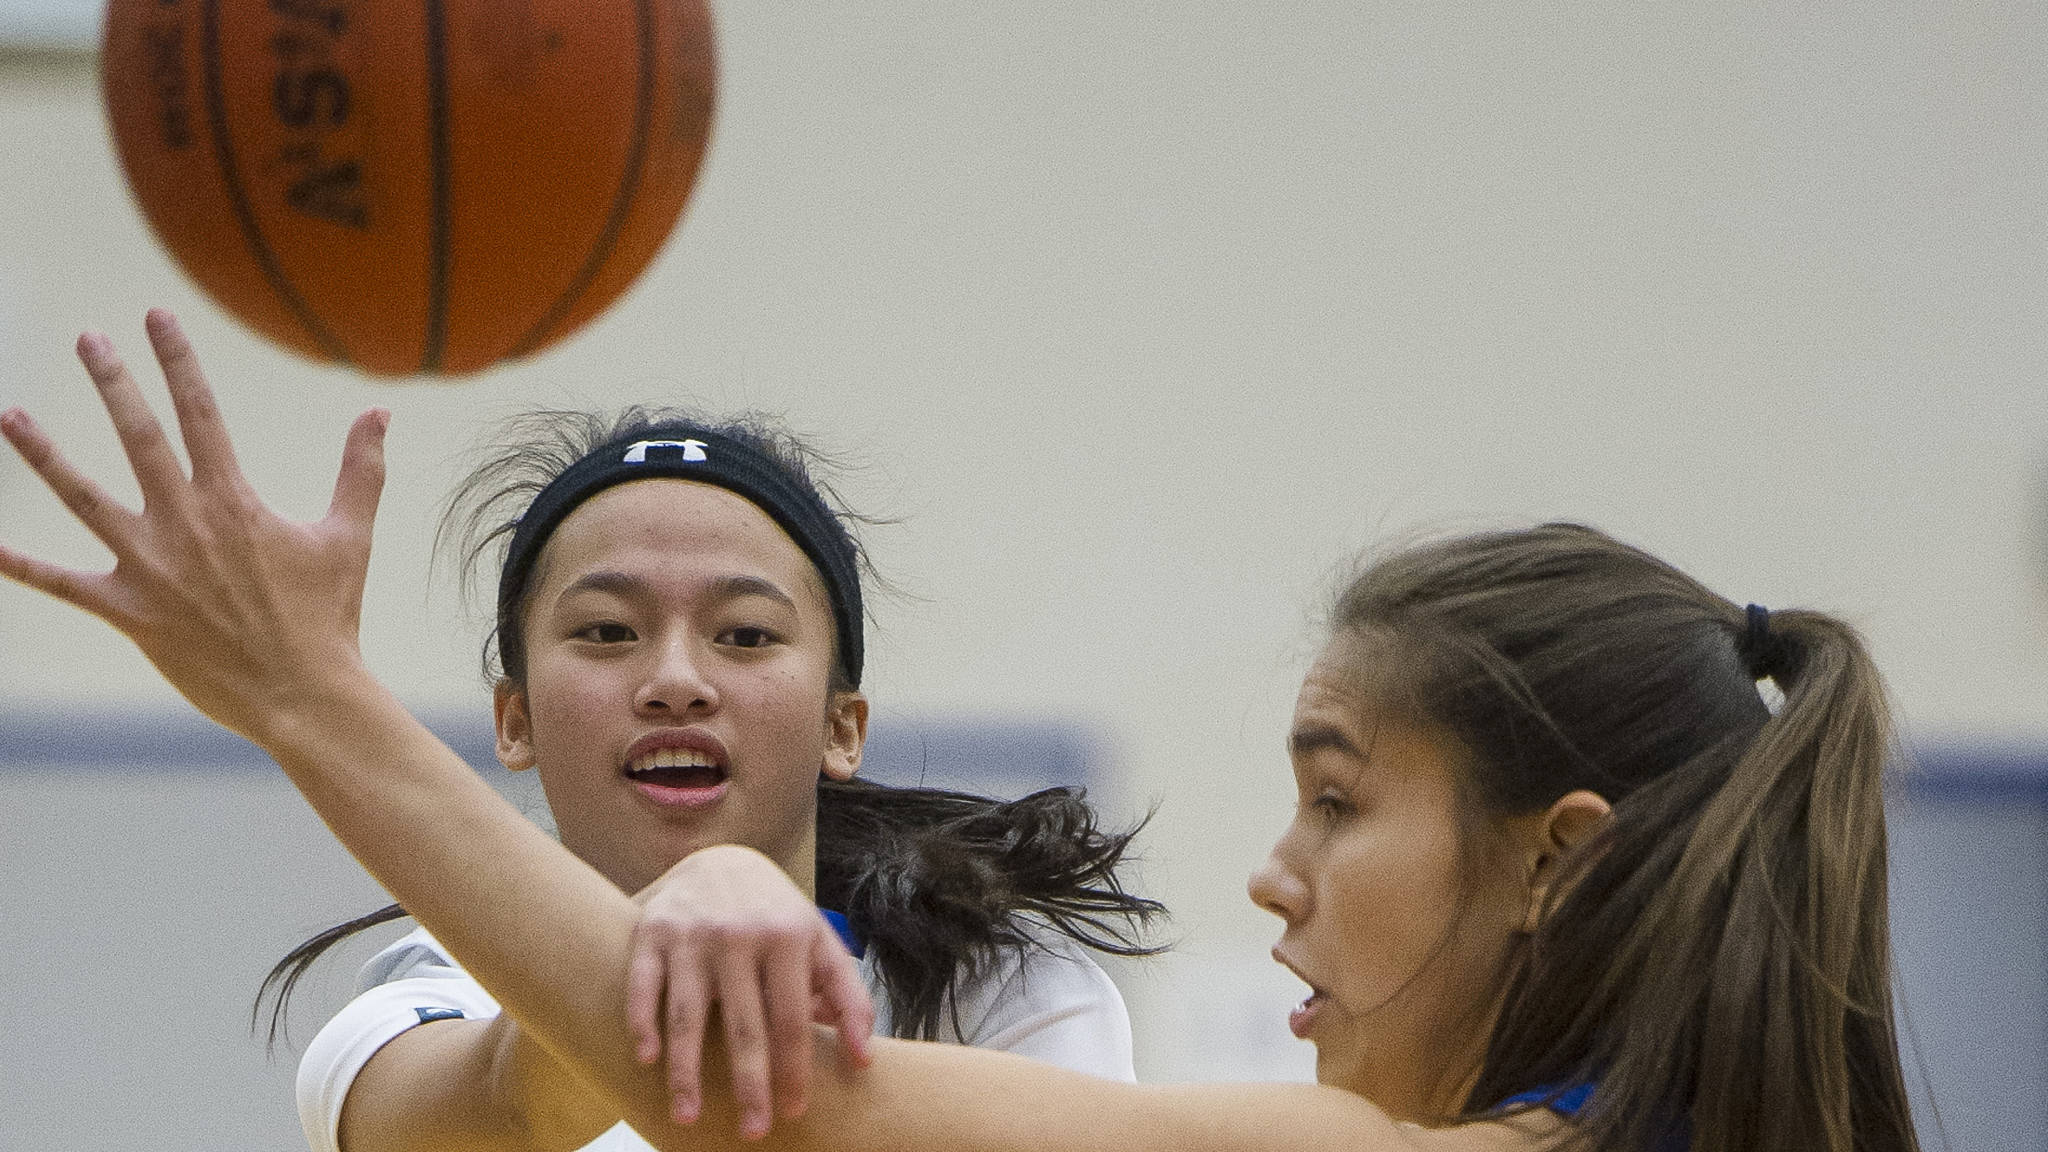 Thunder Mountain’s Neal Garcia, left, passes against Sitka’s Marlis Boord last month. Garcia and her sister, Khaye Garcia, are two of many players on Thunder Mountain that play on both the varsity and junior varsity teams. (Michael Penn | Juneau Empire File)